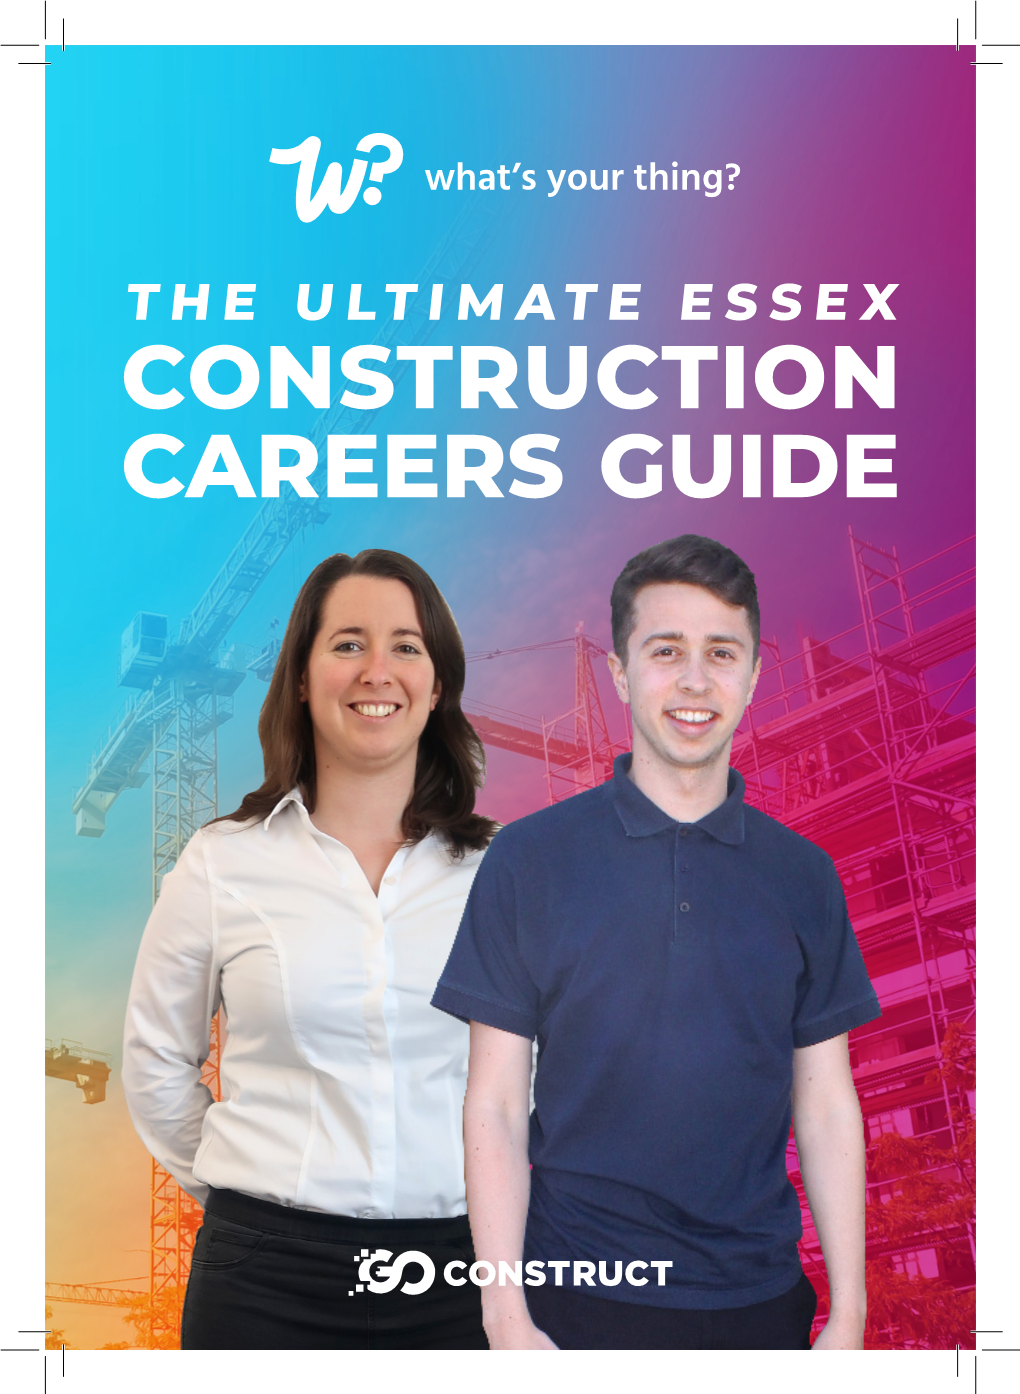 CONSTRUCTION CAREERS GUIDE Your School, Your House, Your Cinema